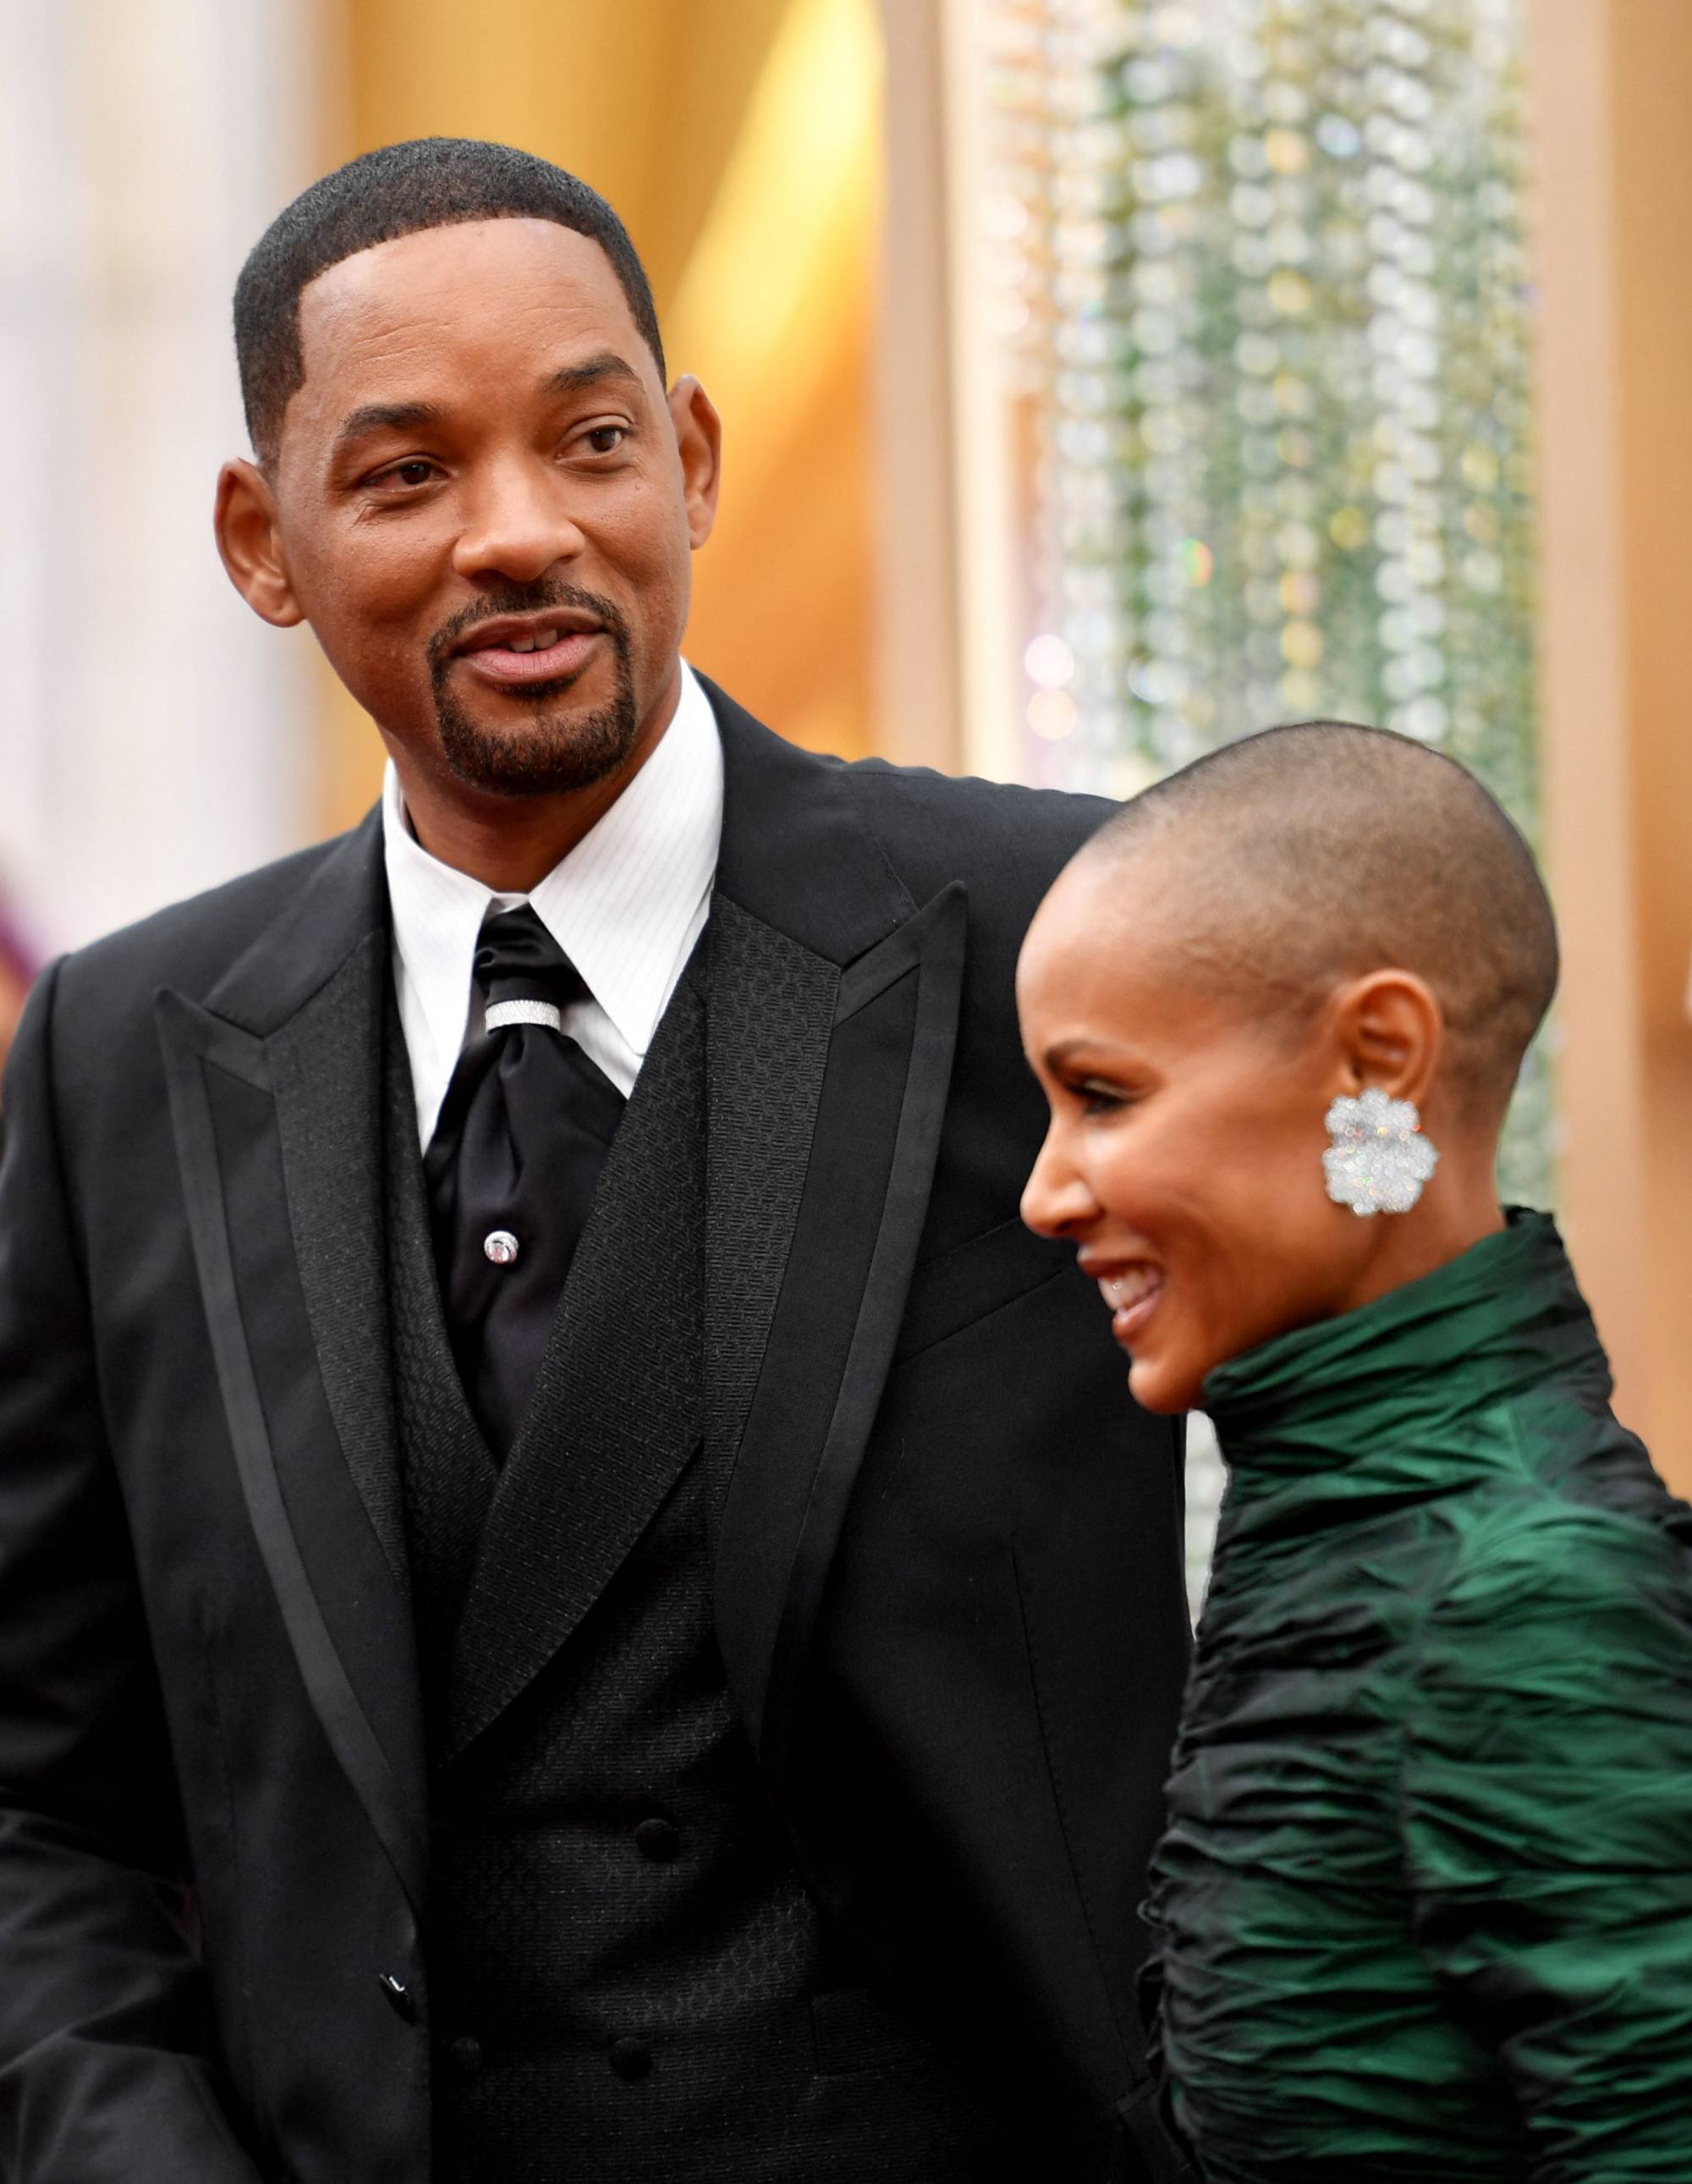 US actor Will Smith with his wife, actress Jada Pinkett Smith, at the 94th Oscars at the Dolby Theatre in Hollywood, on March 27. Photo: AFP